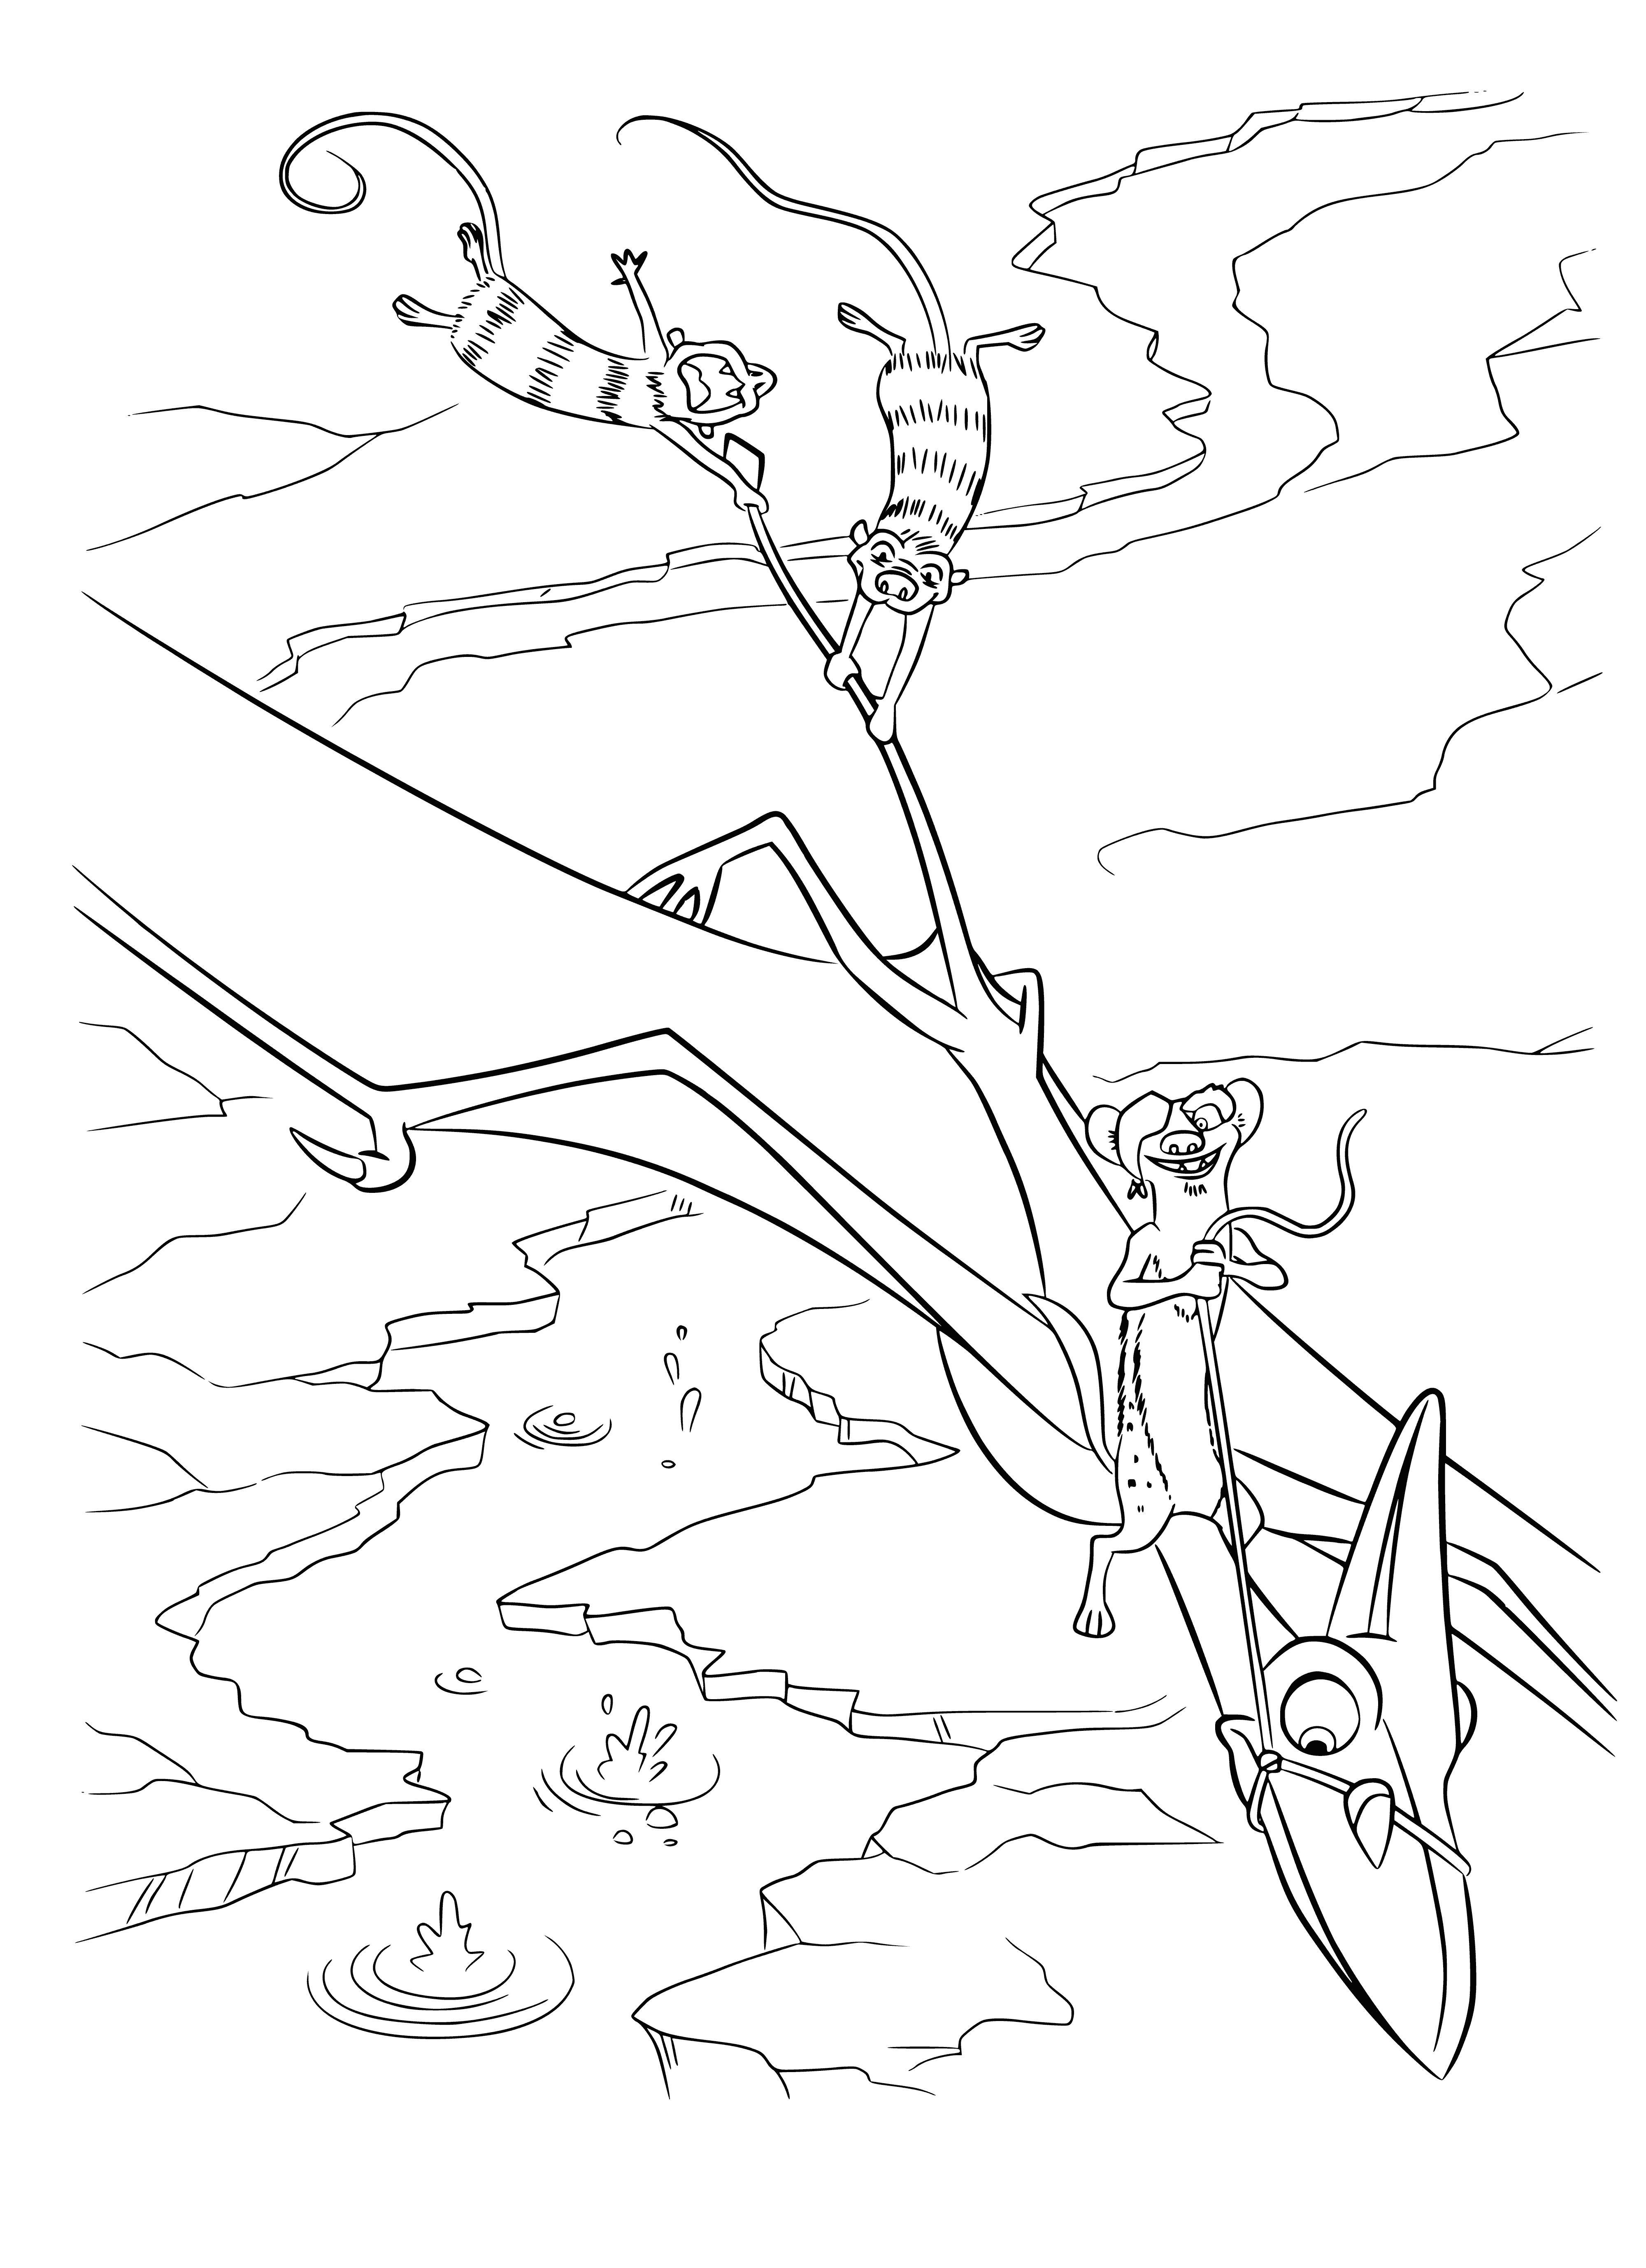 coloring page: Bug and possum meet in an Ice Age forest: possum hangs from a tree, bug crawls on trunk. Scene shows grassy area with trees.